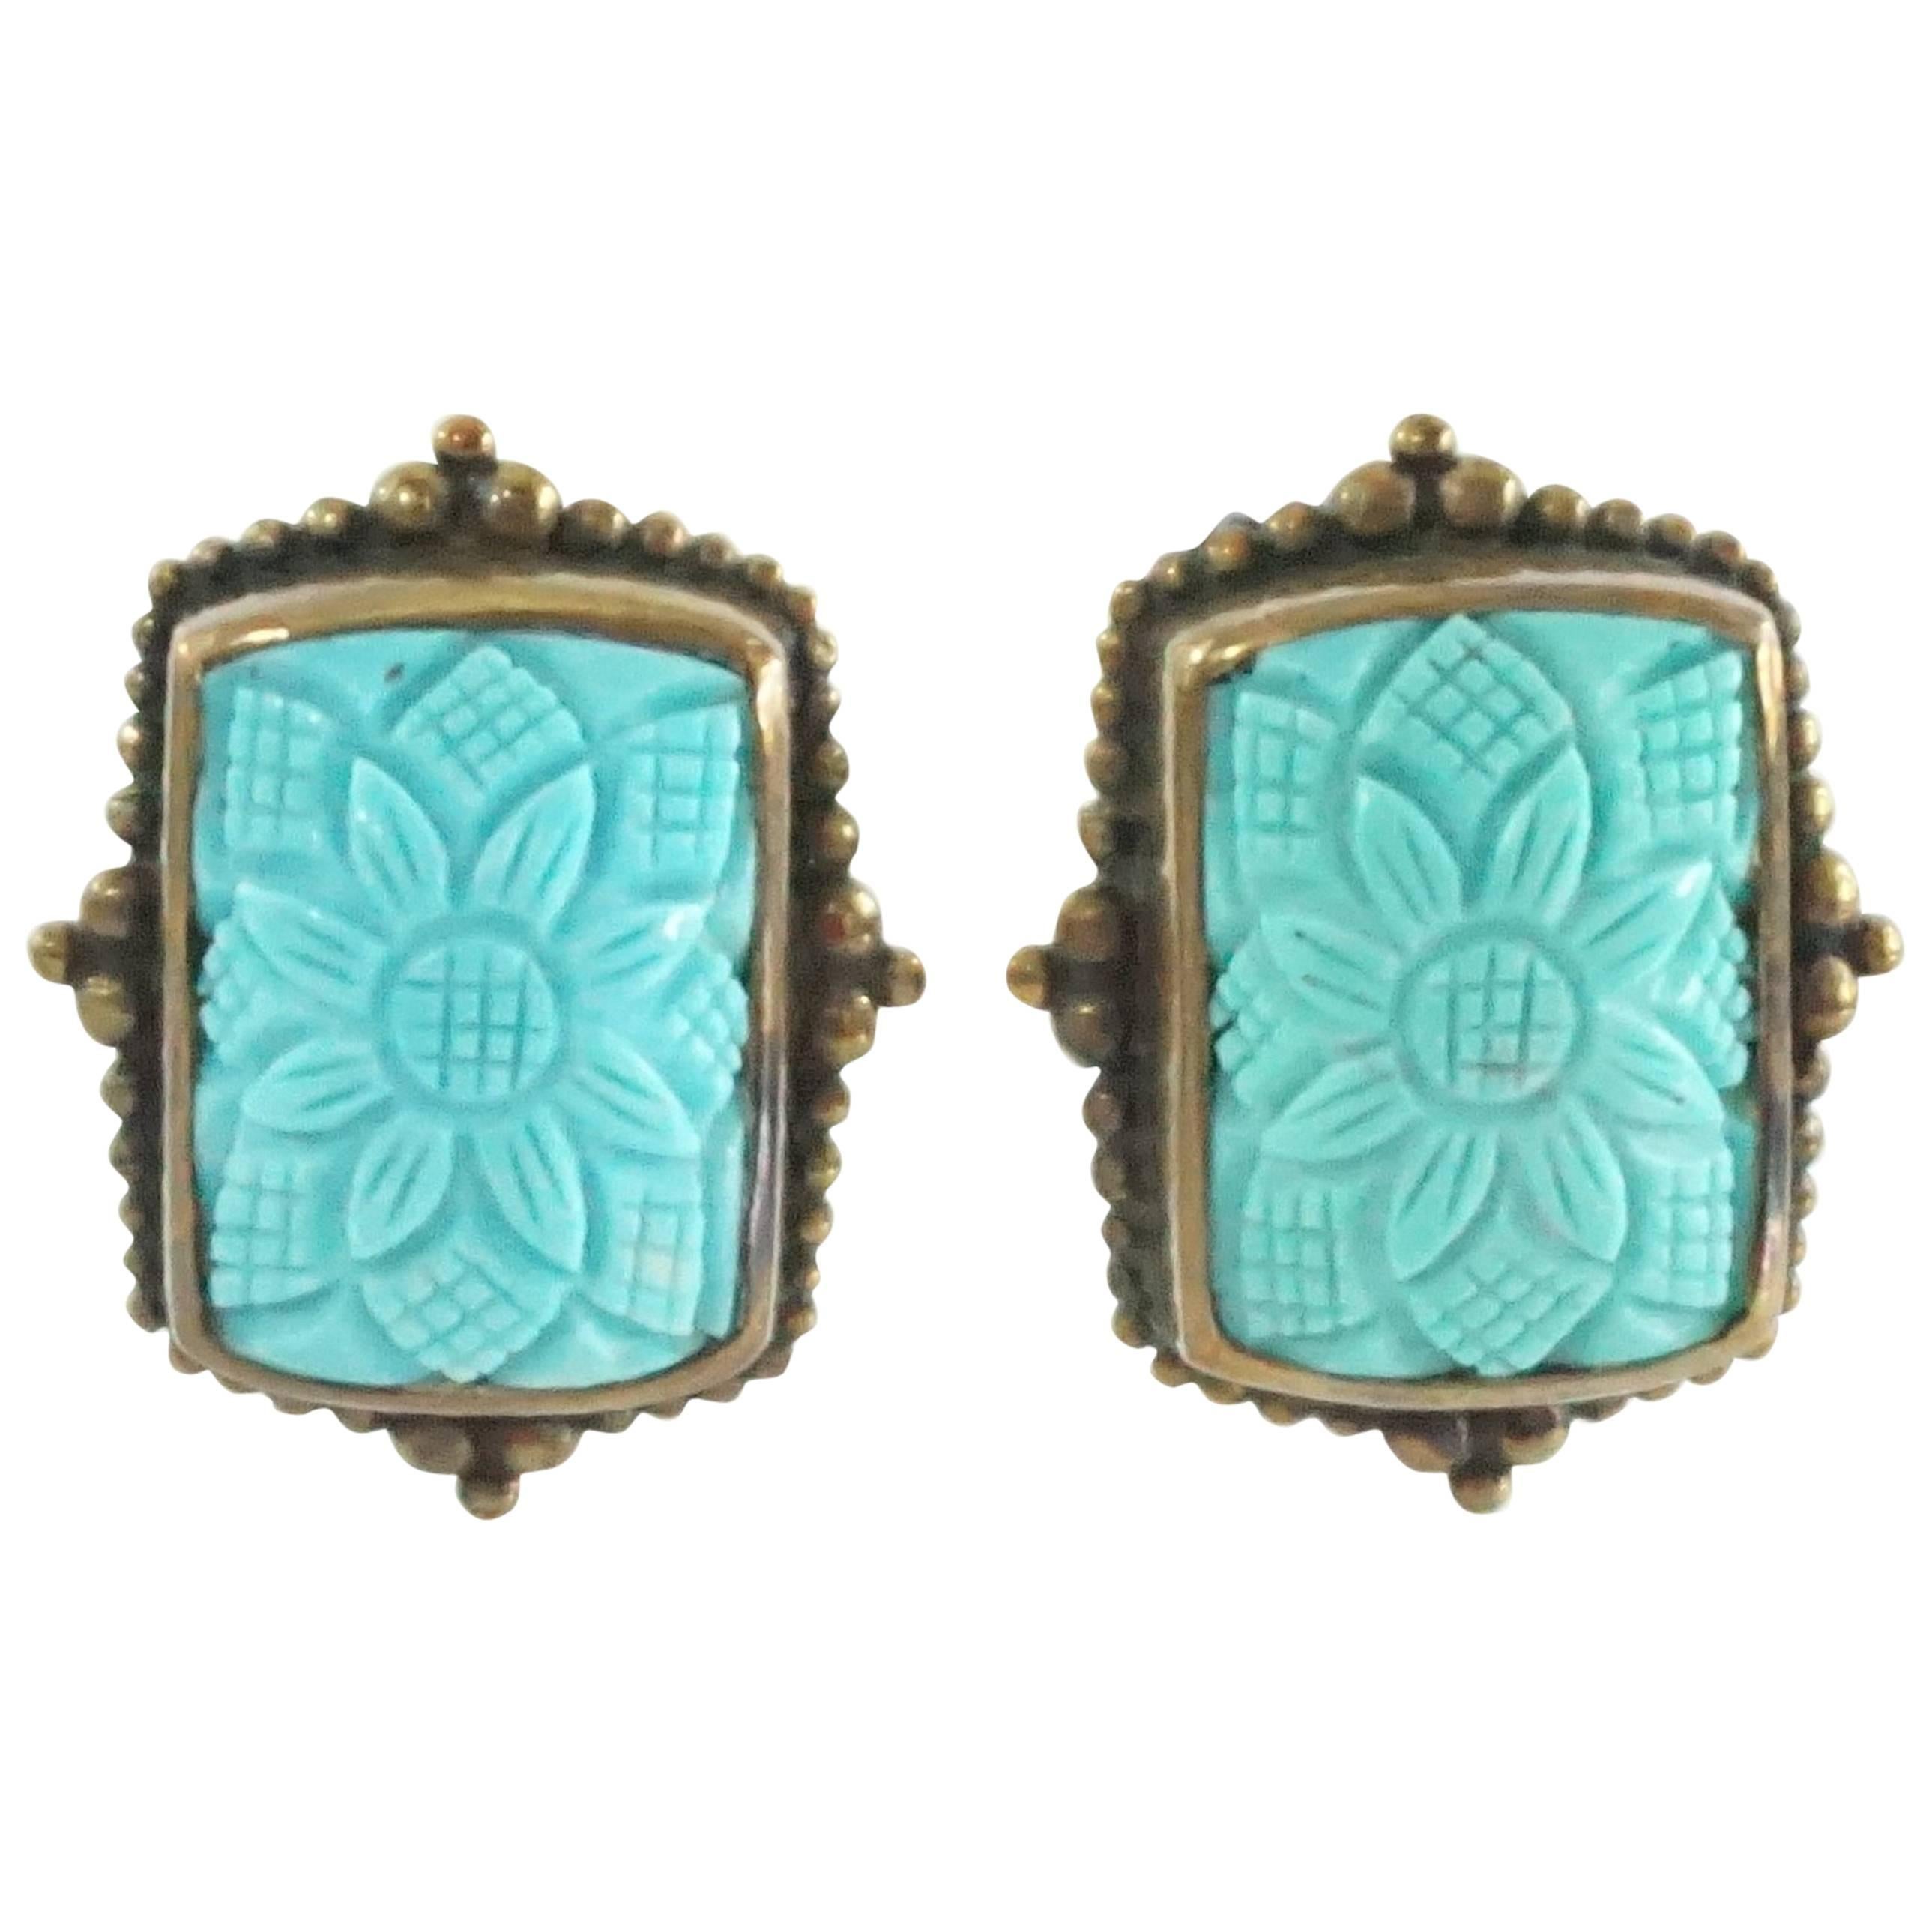 Stephen Dweck Turquoise and Bronze Earrings NWT - 2001 Collection